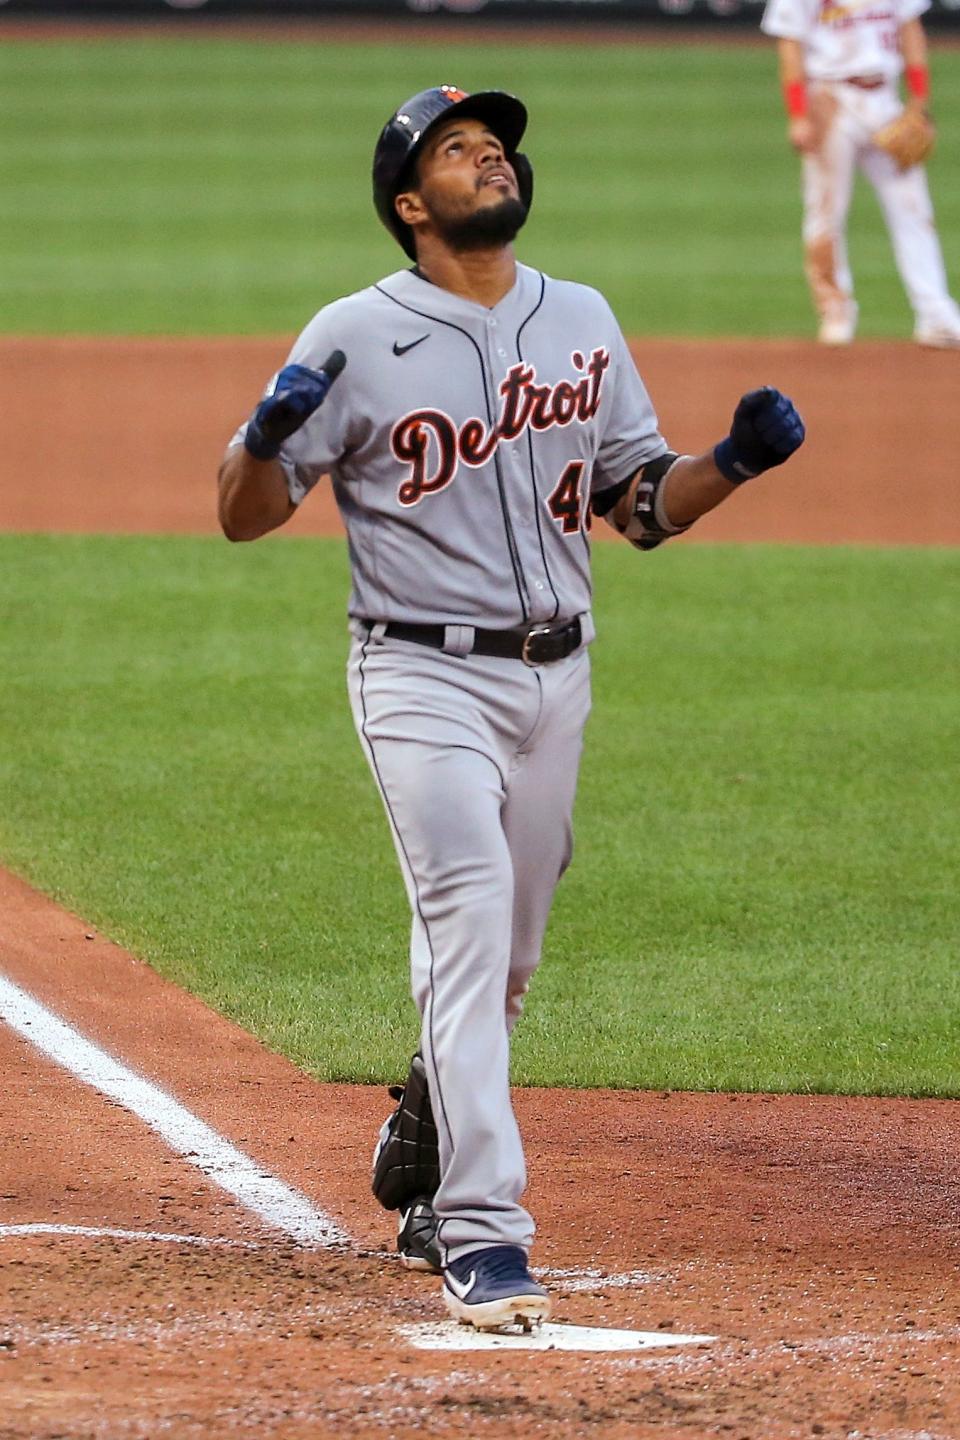 Tigers first baseman Jeimer Candelario looks skyward as he crosses home plate after hitting solo home run during the sixth inning in the second game of the doubleheader against the Cardinals on Thursday, Sept. 10, 2020, in St. Louis.